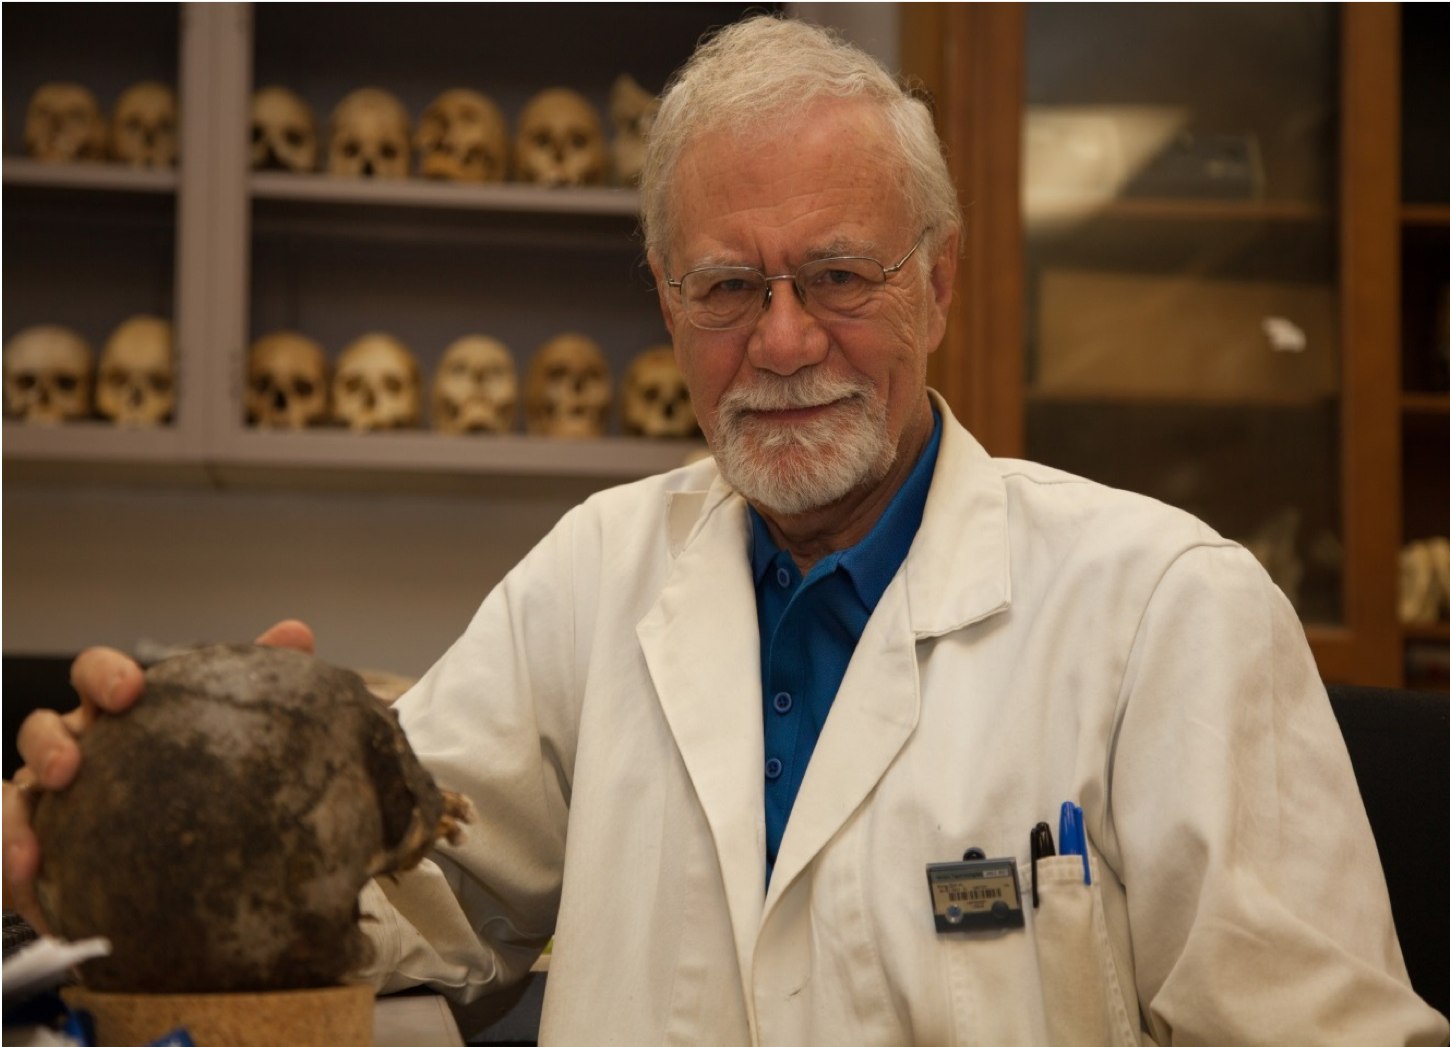 UNT forensic anthropology professor recognized for outstanding contributions to the field